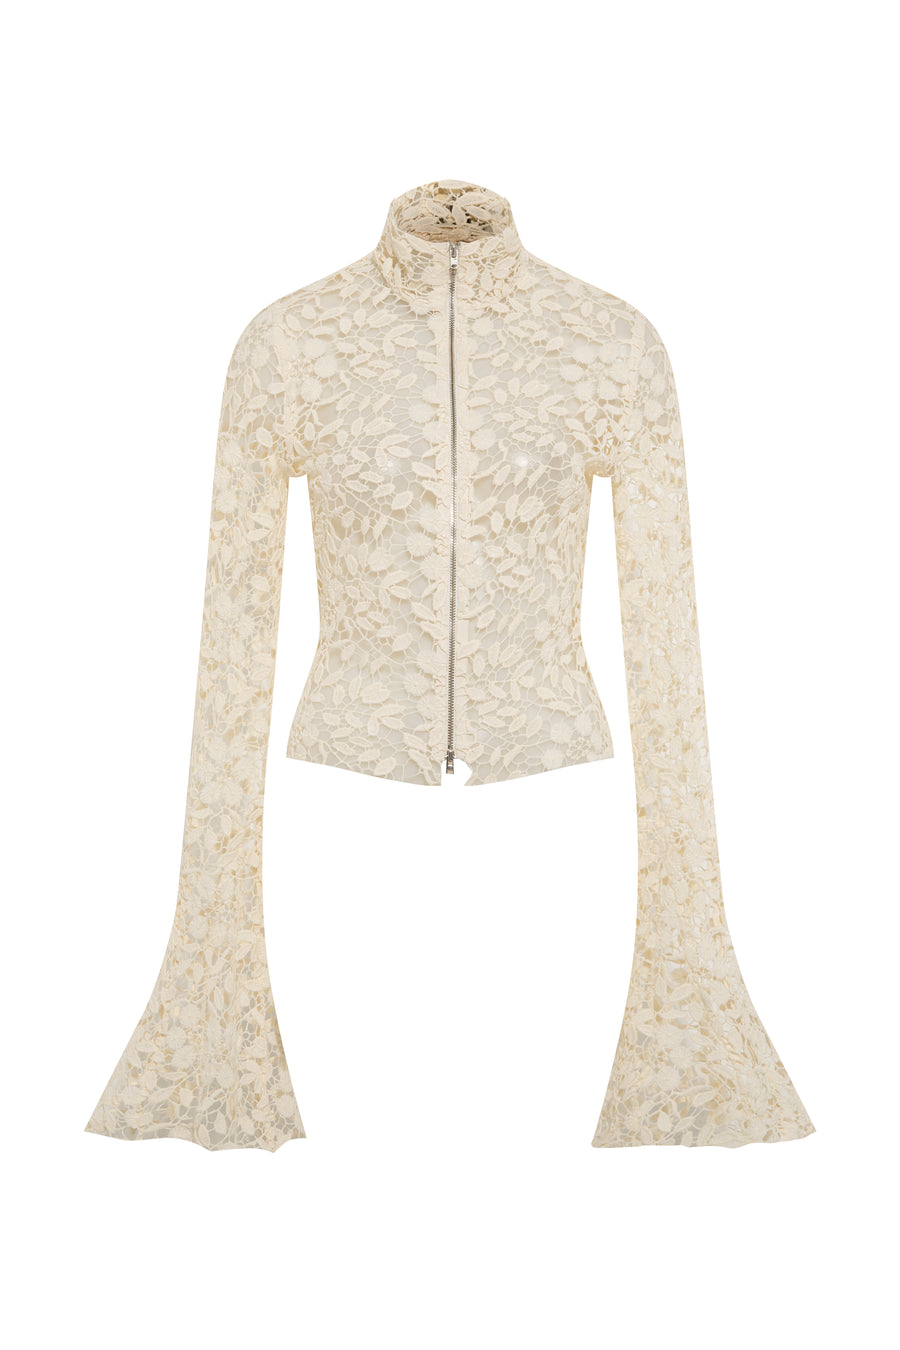 JUN - Zip-up flared sleeve lace top